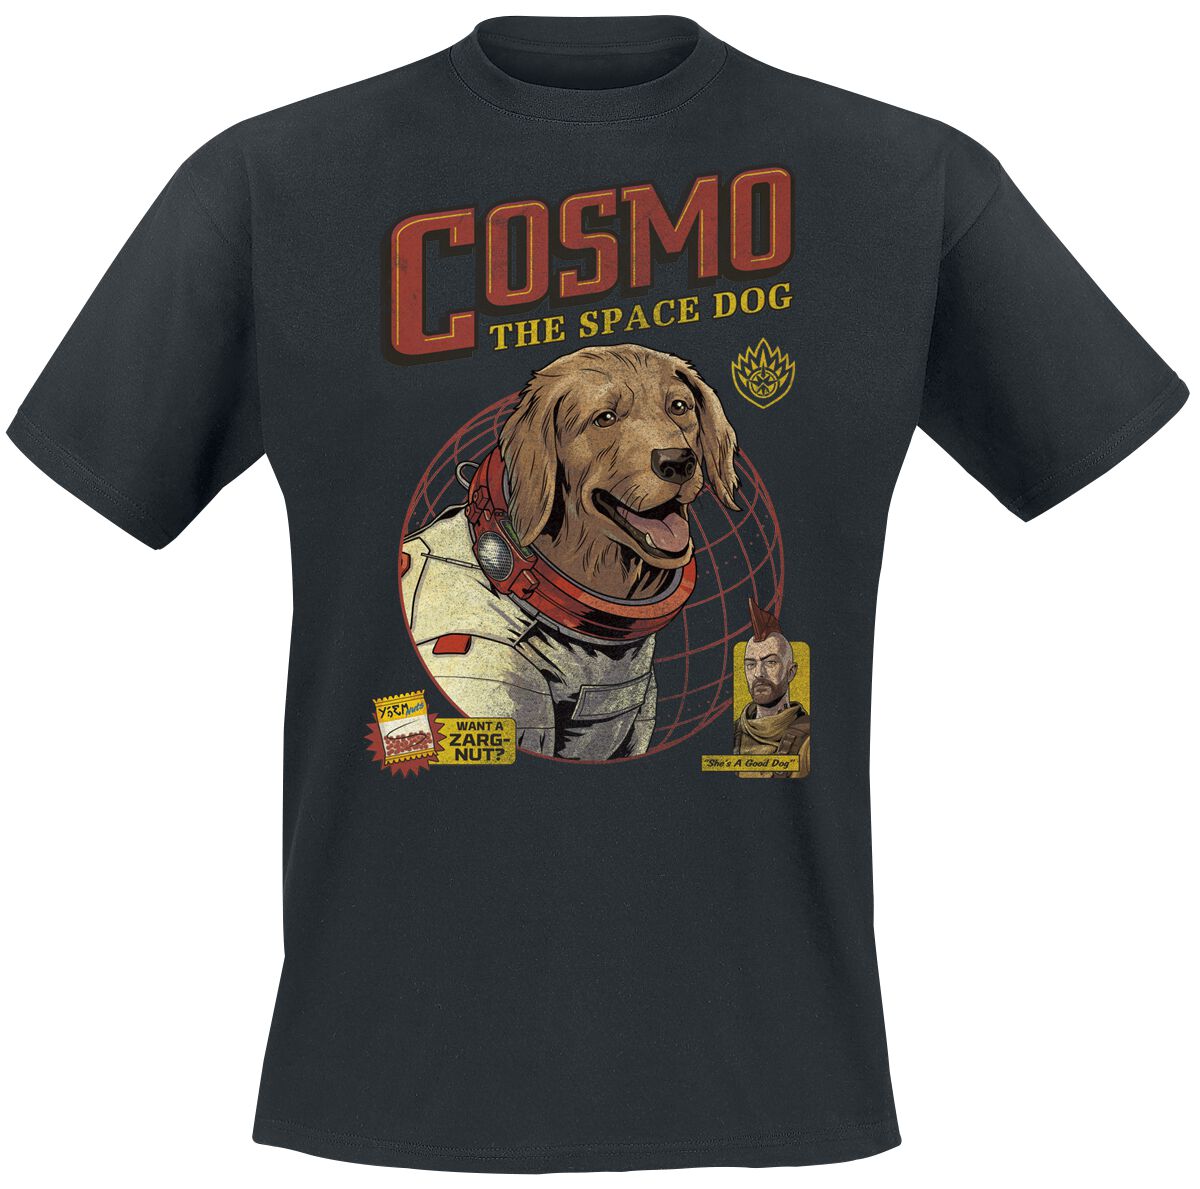 Guardians Of The Galaxy Vol. 3 - Cosmo -The Space Dog T-Shirt schwarz in M